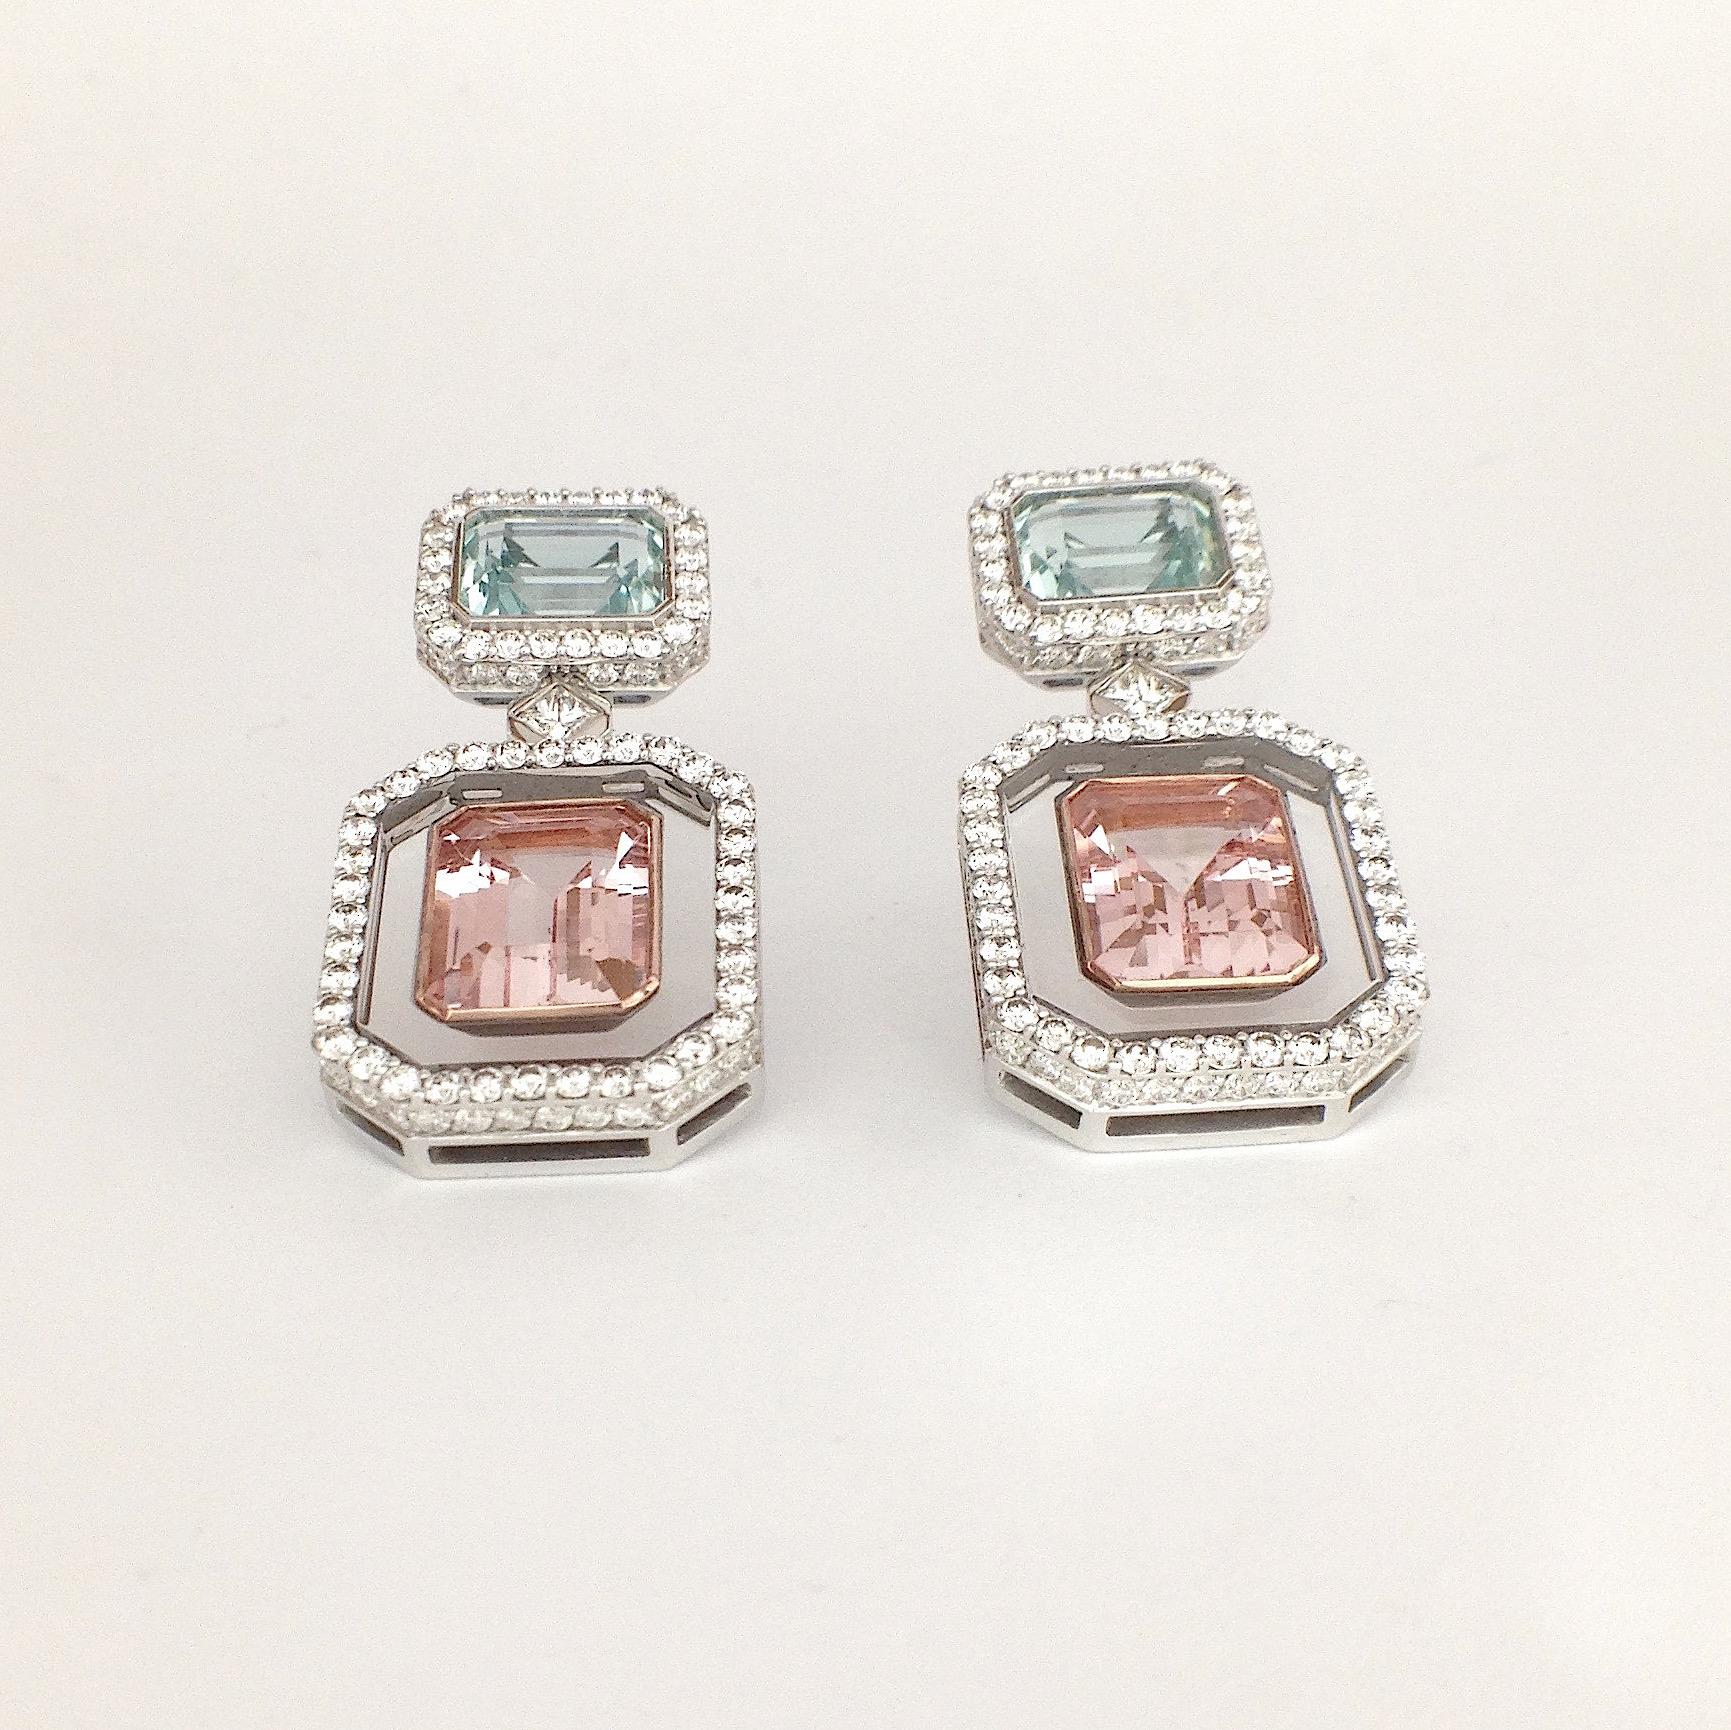 Gemstone Morganite Green Beryl Diamond 18KT Gold Rock Crystal Earrings and Jewelry Box 
These stunning earrings are made of white gold and are composed of three articulated elements.
The upper part has an emerald-cut green beryl, surrounded by white